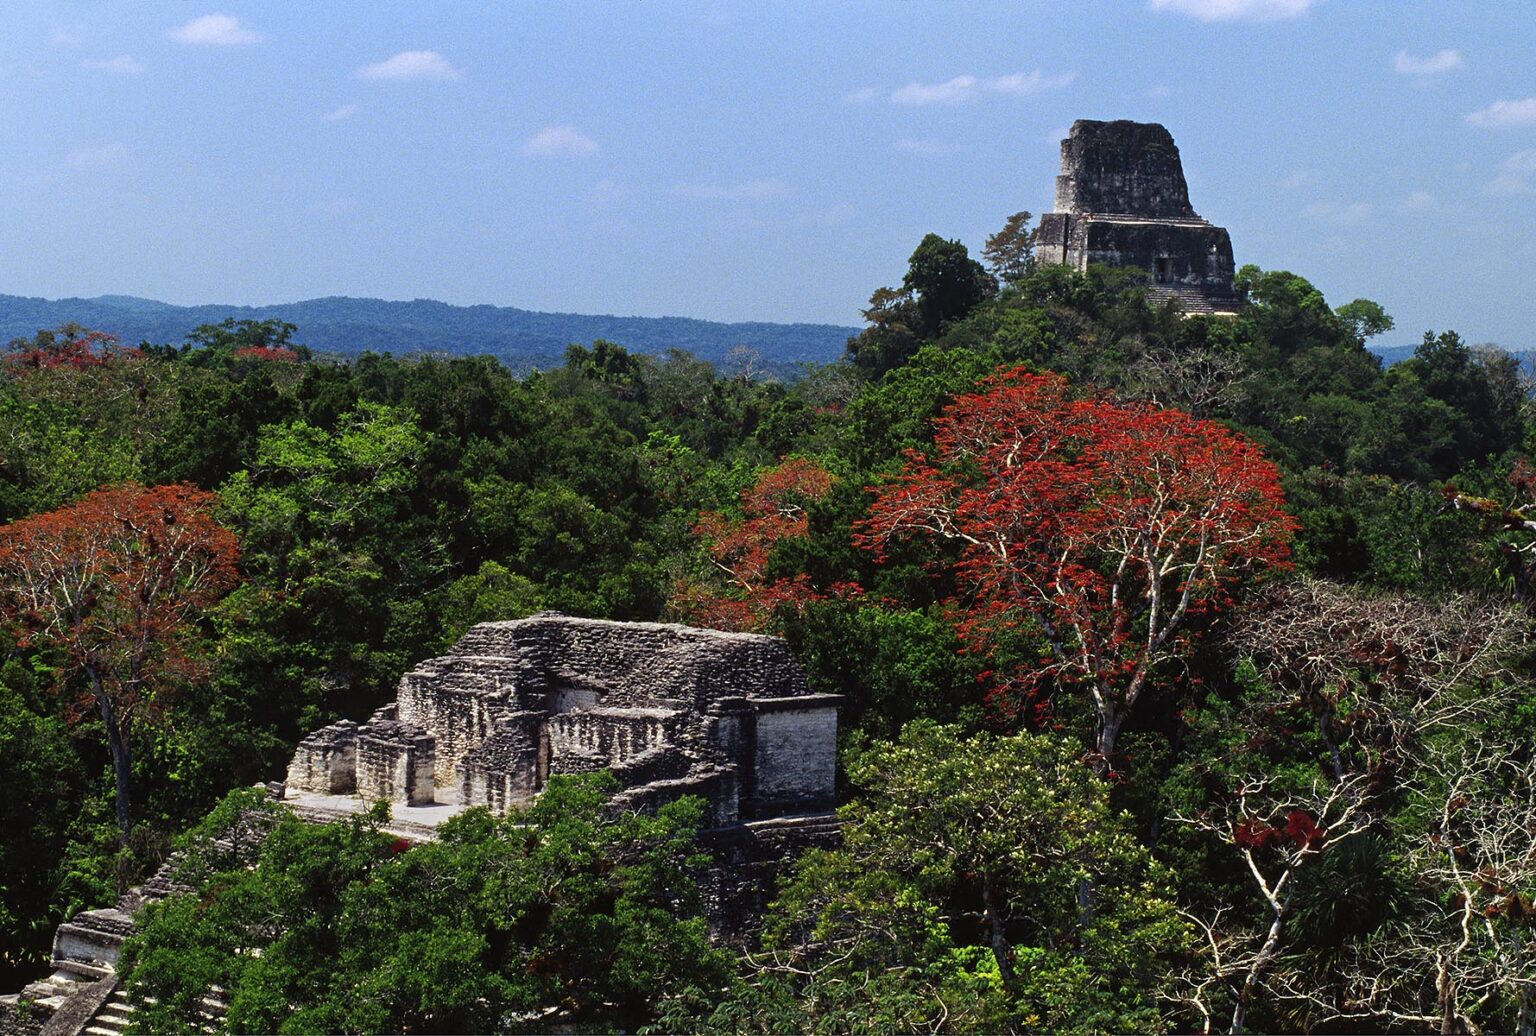 A view of MAYA TEMPLE IV, rising 212 ft. tall, from the summit of the LOST WORLD TEMPLE - TIKAL, GUATEMALA